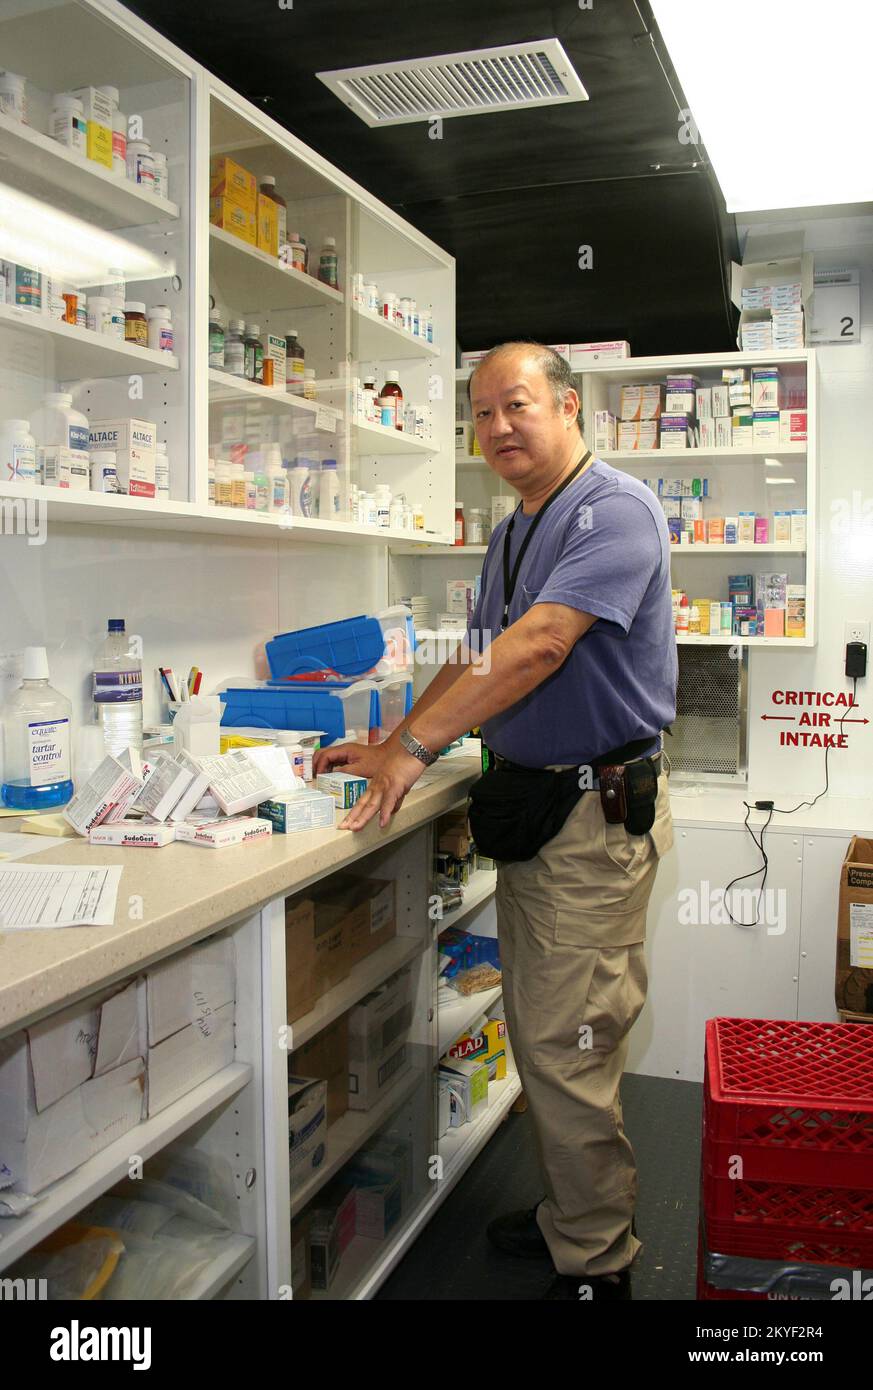 Hurricane Katrina, Plaquemines Parish, LA, November 7, 2005 -- Pharmacist Irwin Chow organized a new shipment of medical supplies in the new and innovative Mobile Medical Unit FEMA set up in the hurricane-ravaged area of soutern Louisiana. Local residents who lost access to medical care can get comprehensive treatment at the MMU. Stock Photo